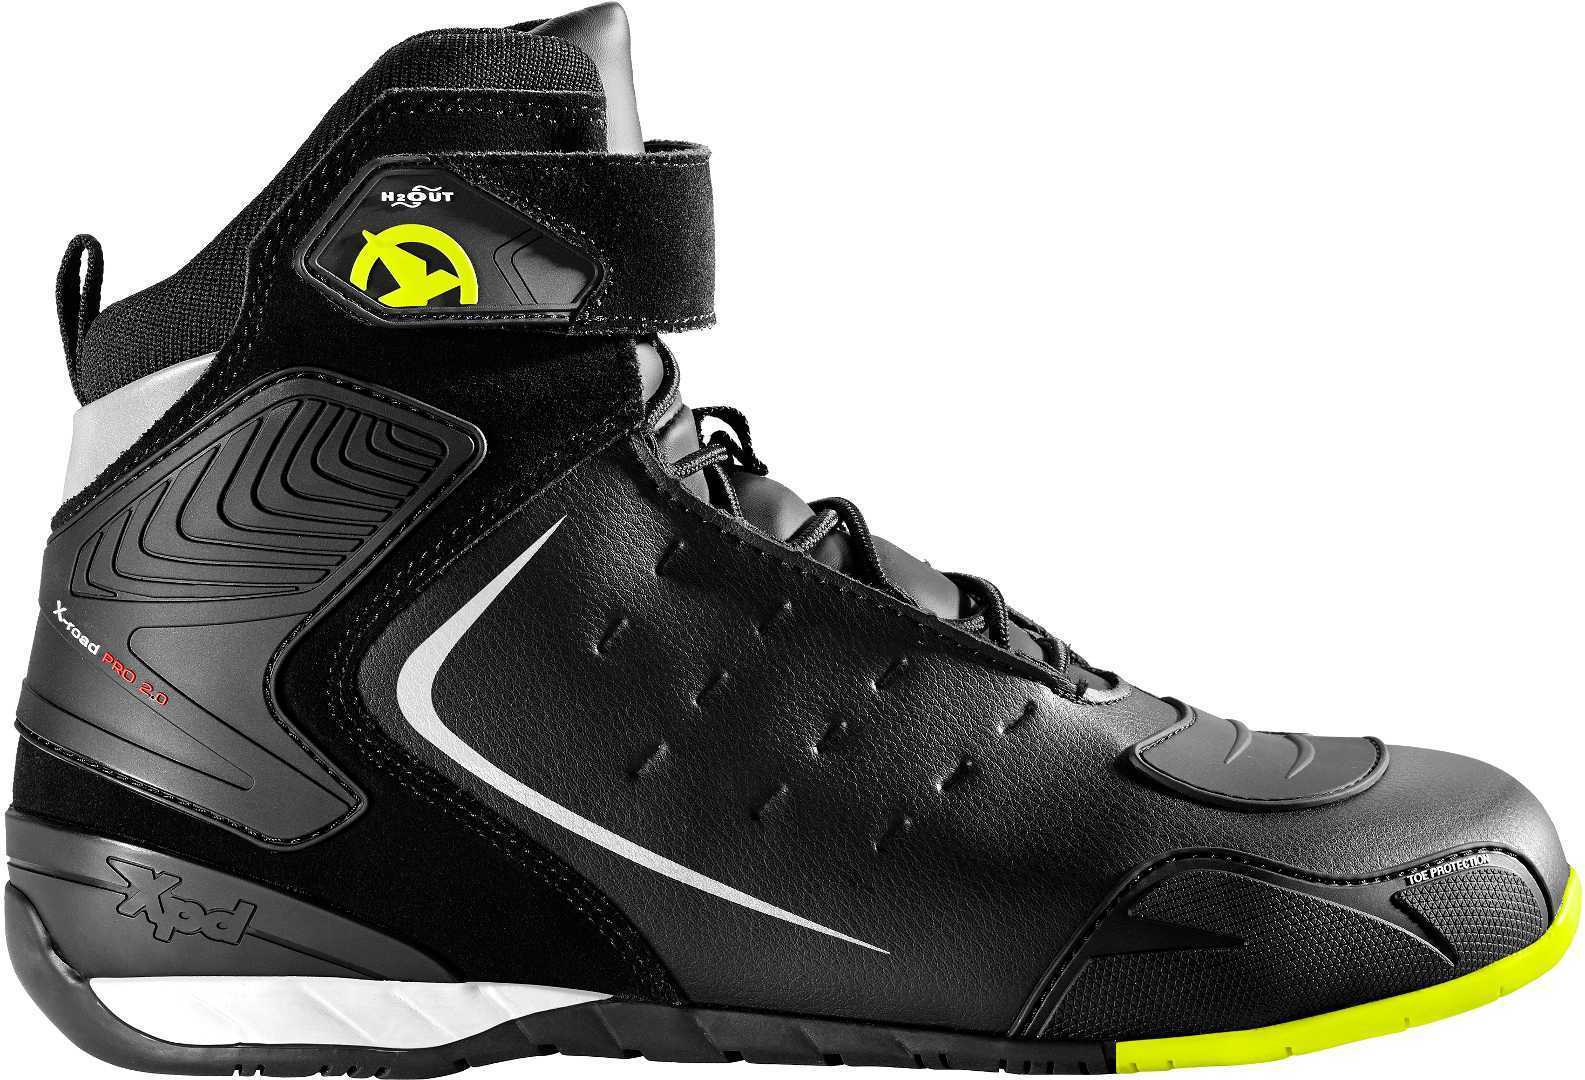 Image of XPD X-Road H2Out Yellow Fluo Talla 41